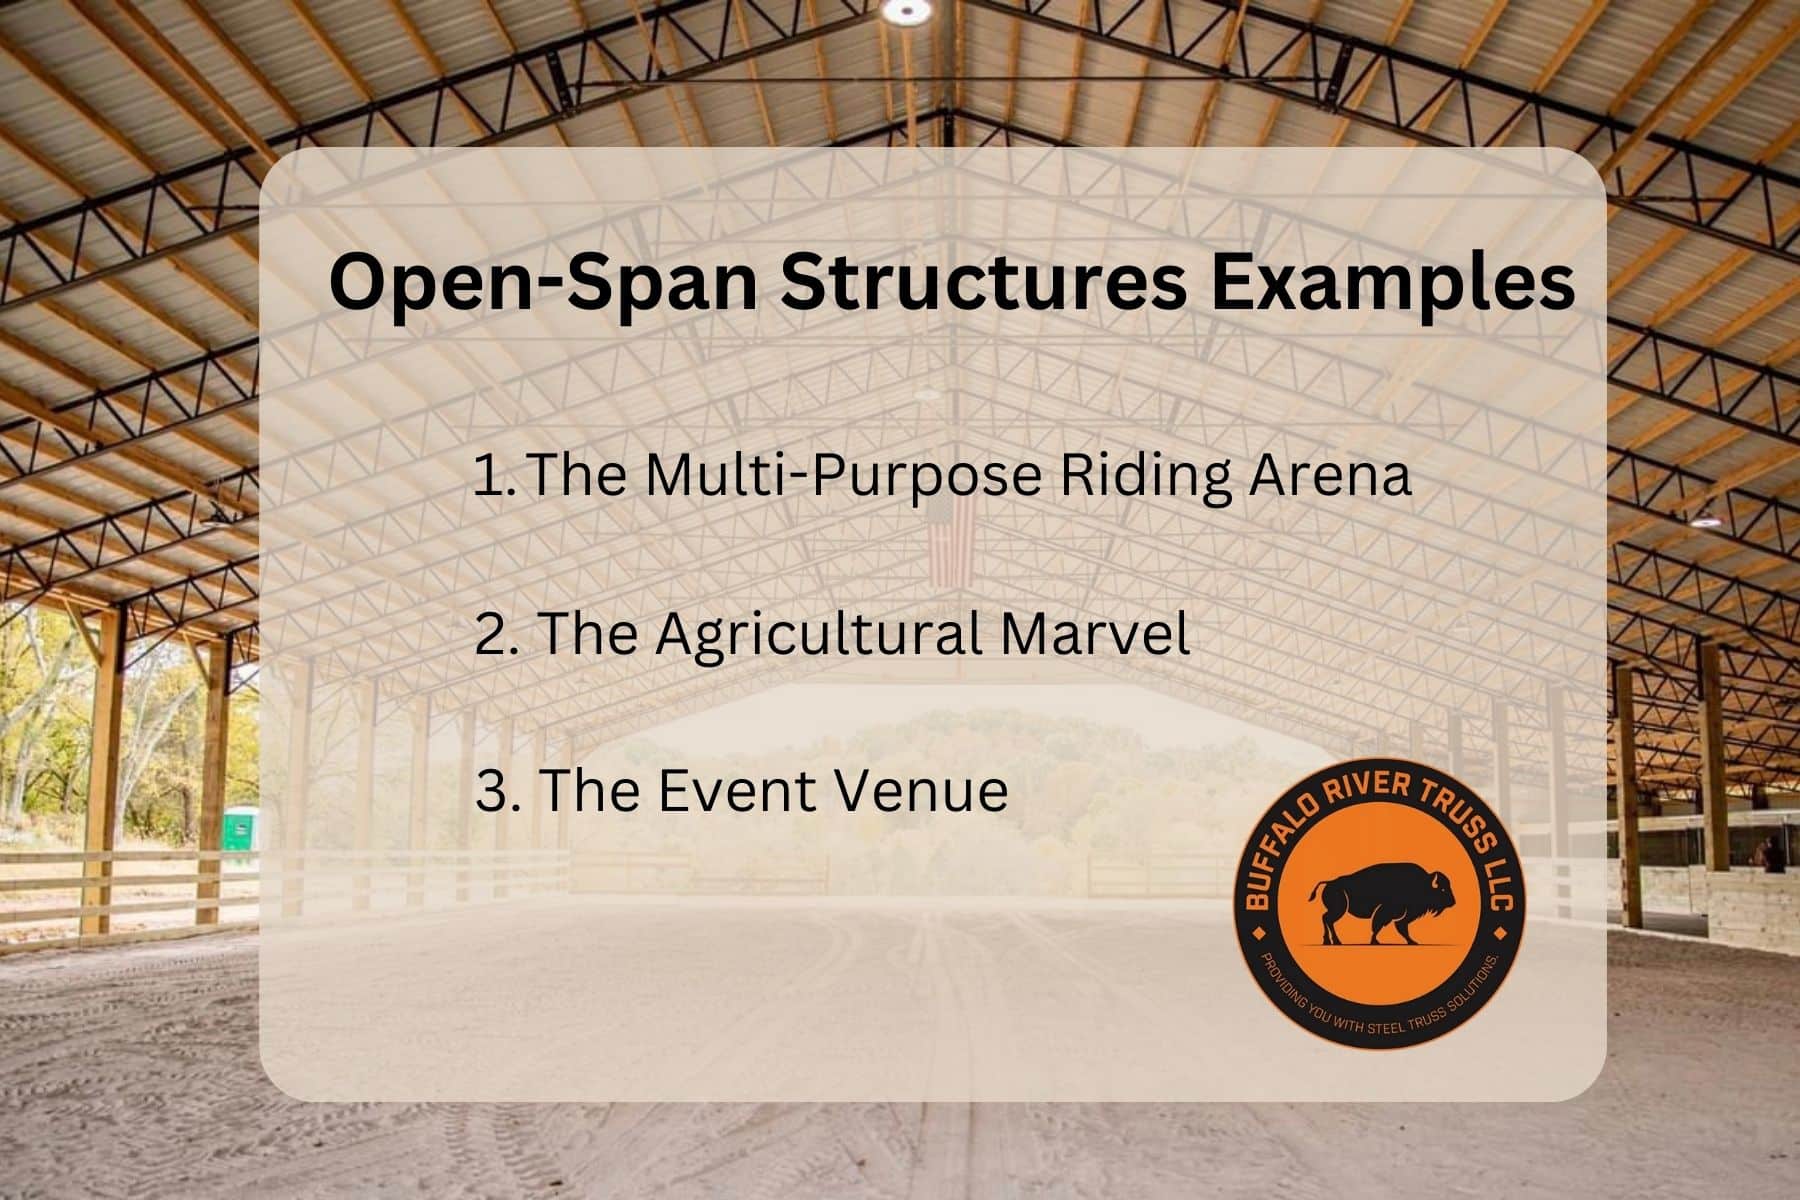 Open-Span Structures